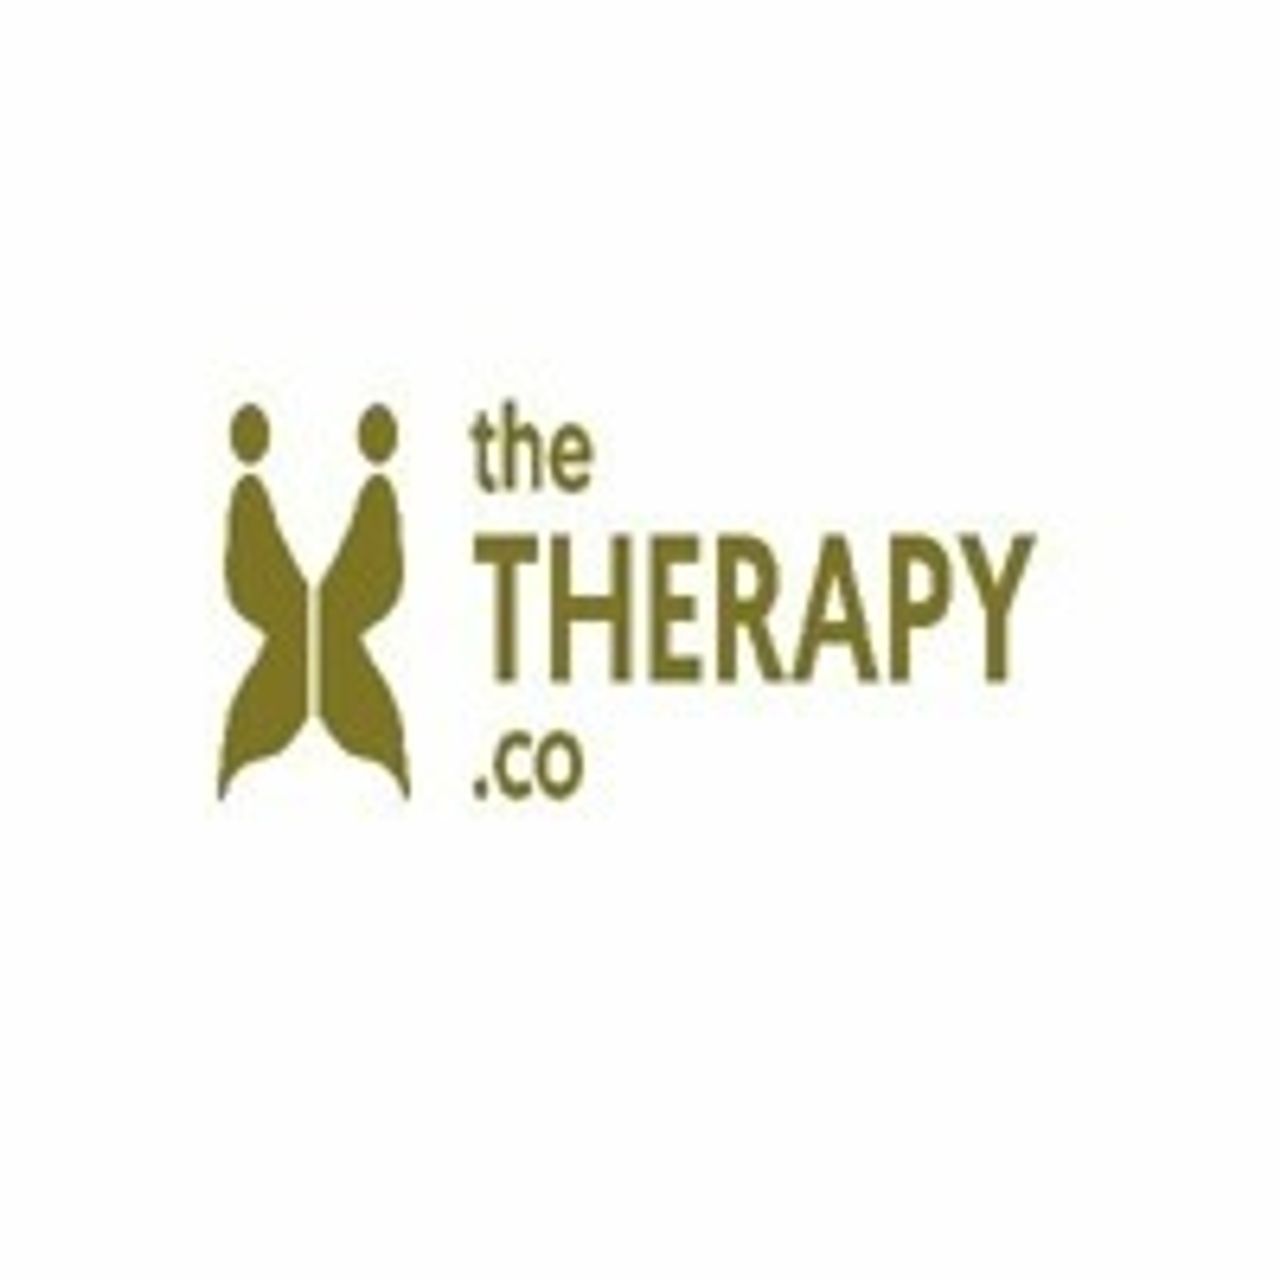 thetherapy